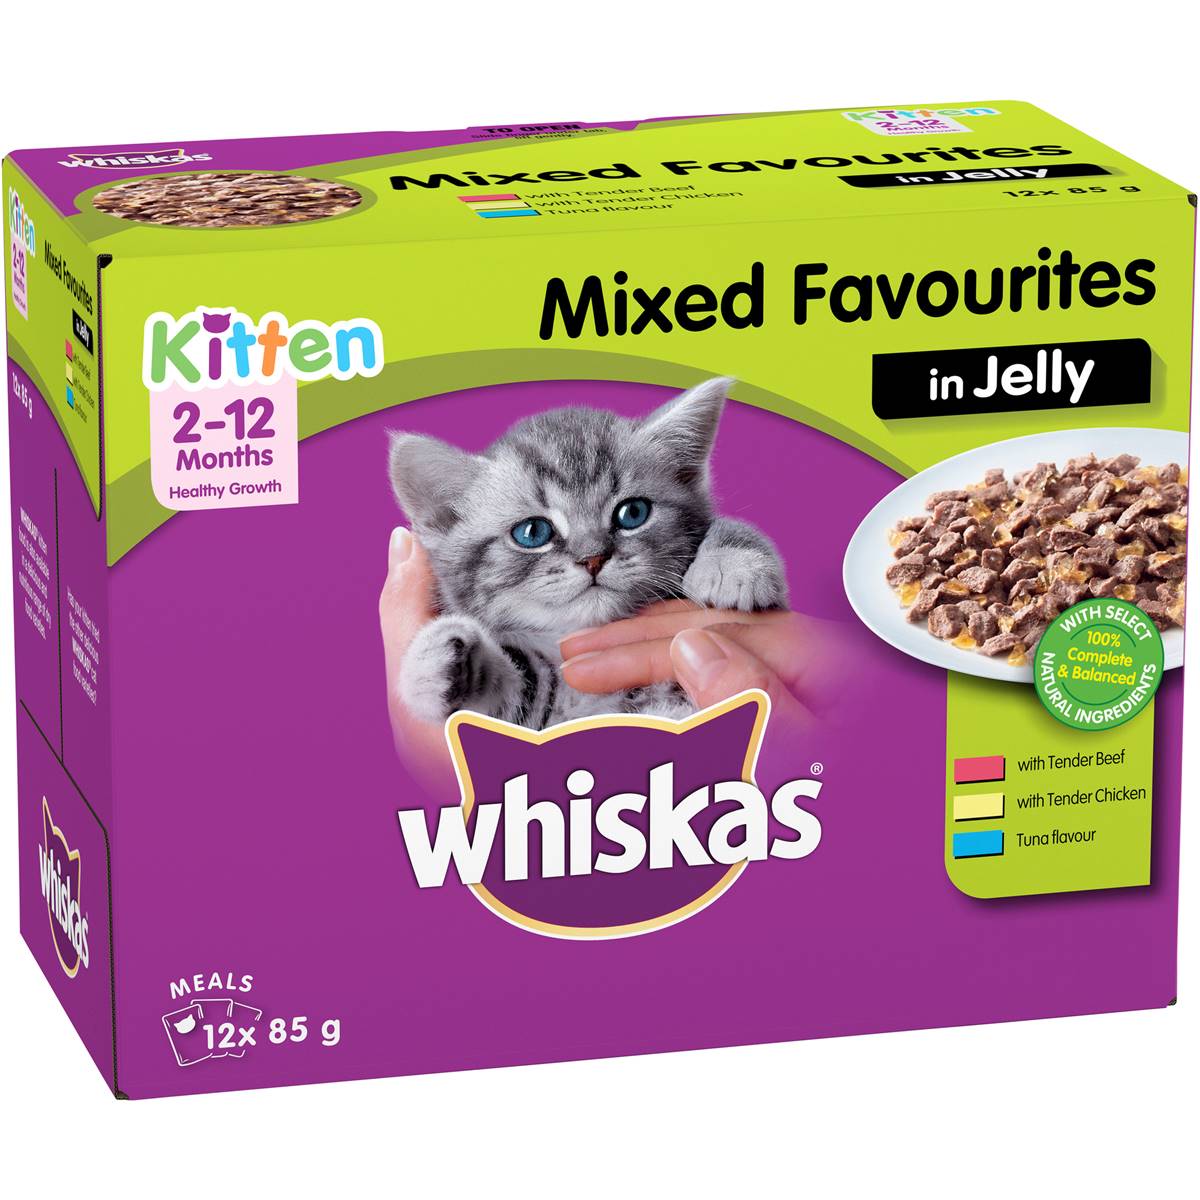 Whiskas Kitten Mixed Favourites In Jelly 2-12 Months 12x85g